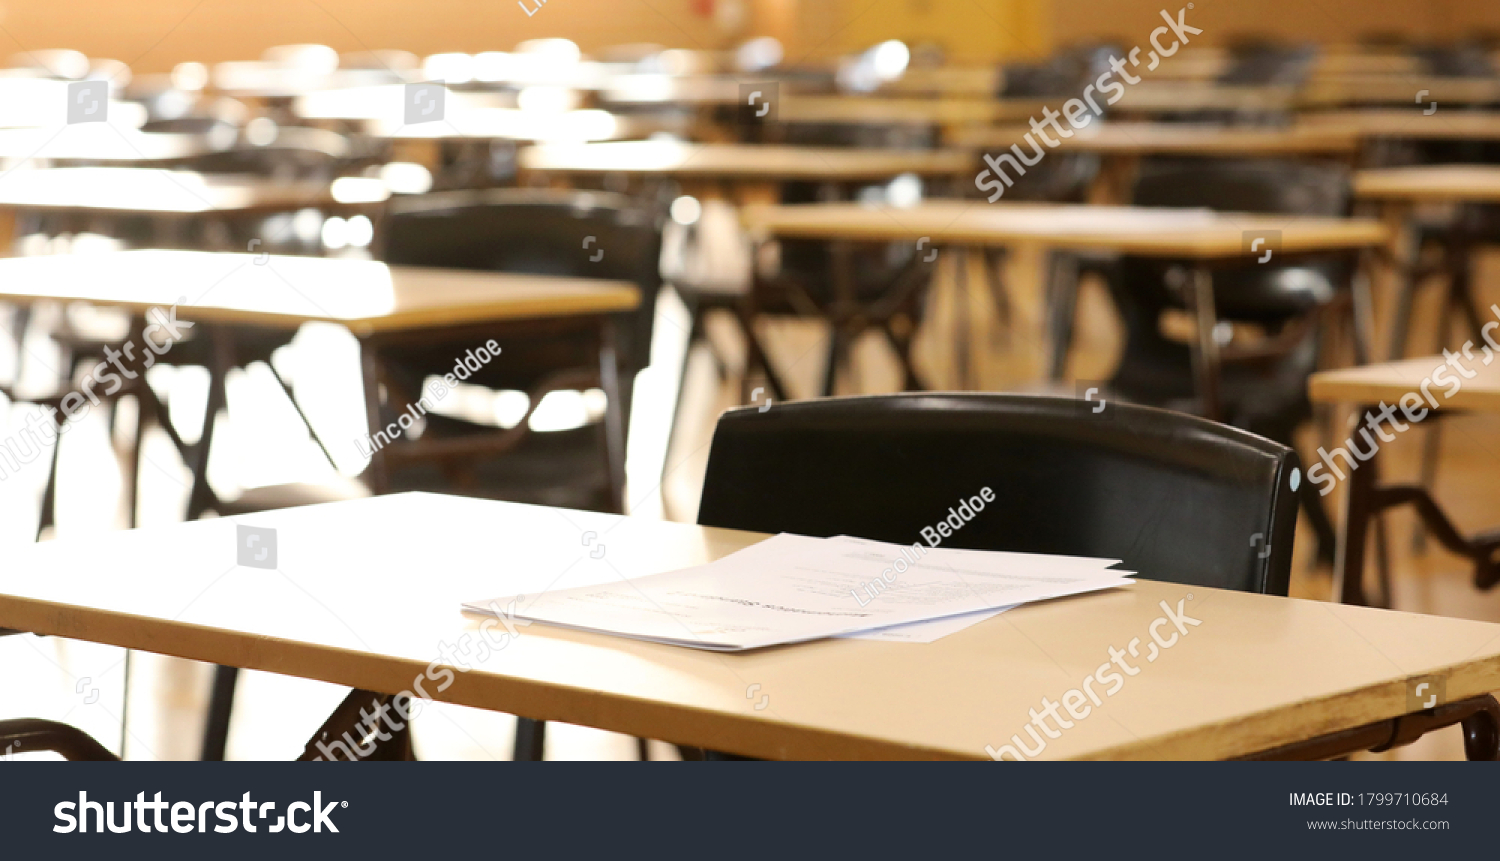 A high school hall or room set up ready for an end of year final exam to be sat by students. examination paper sitting on the edge of a desk or table.  #1799710684